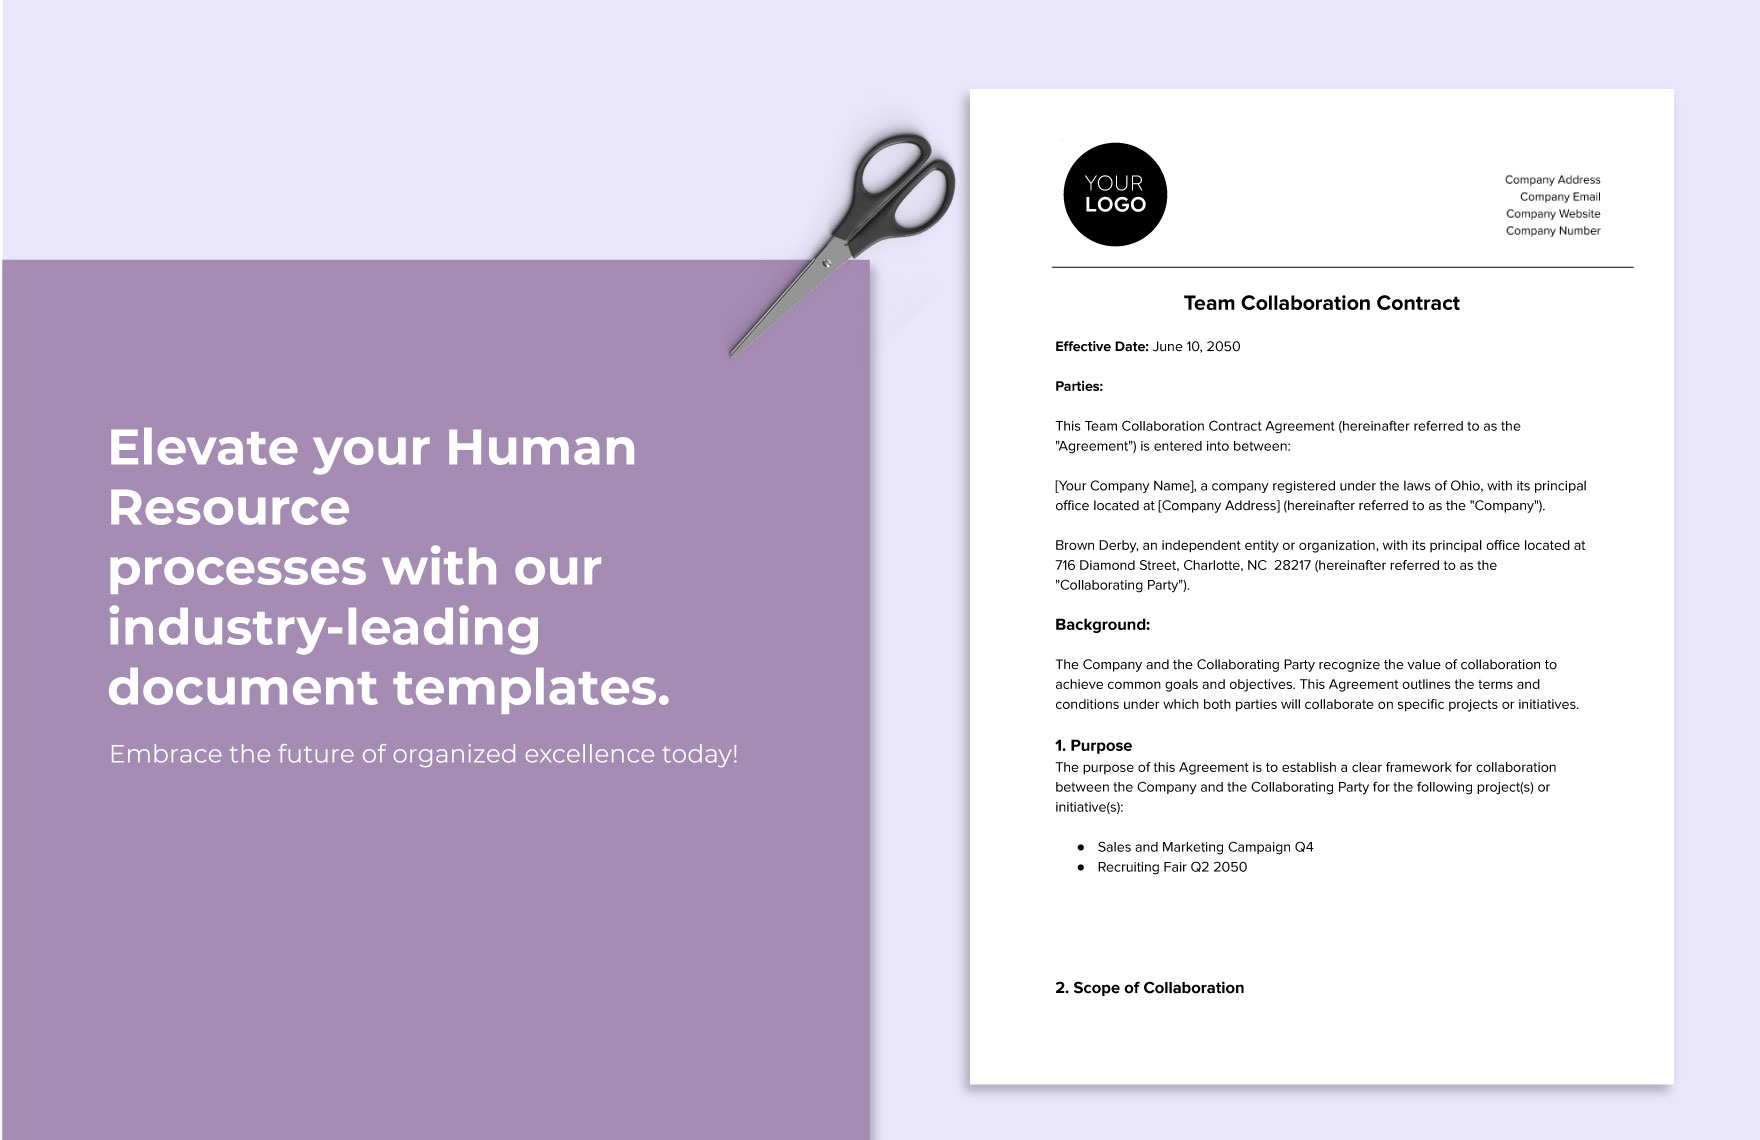 Team Collaboration Contract HR Template